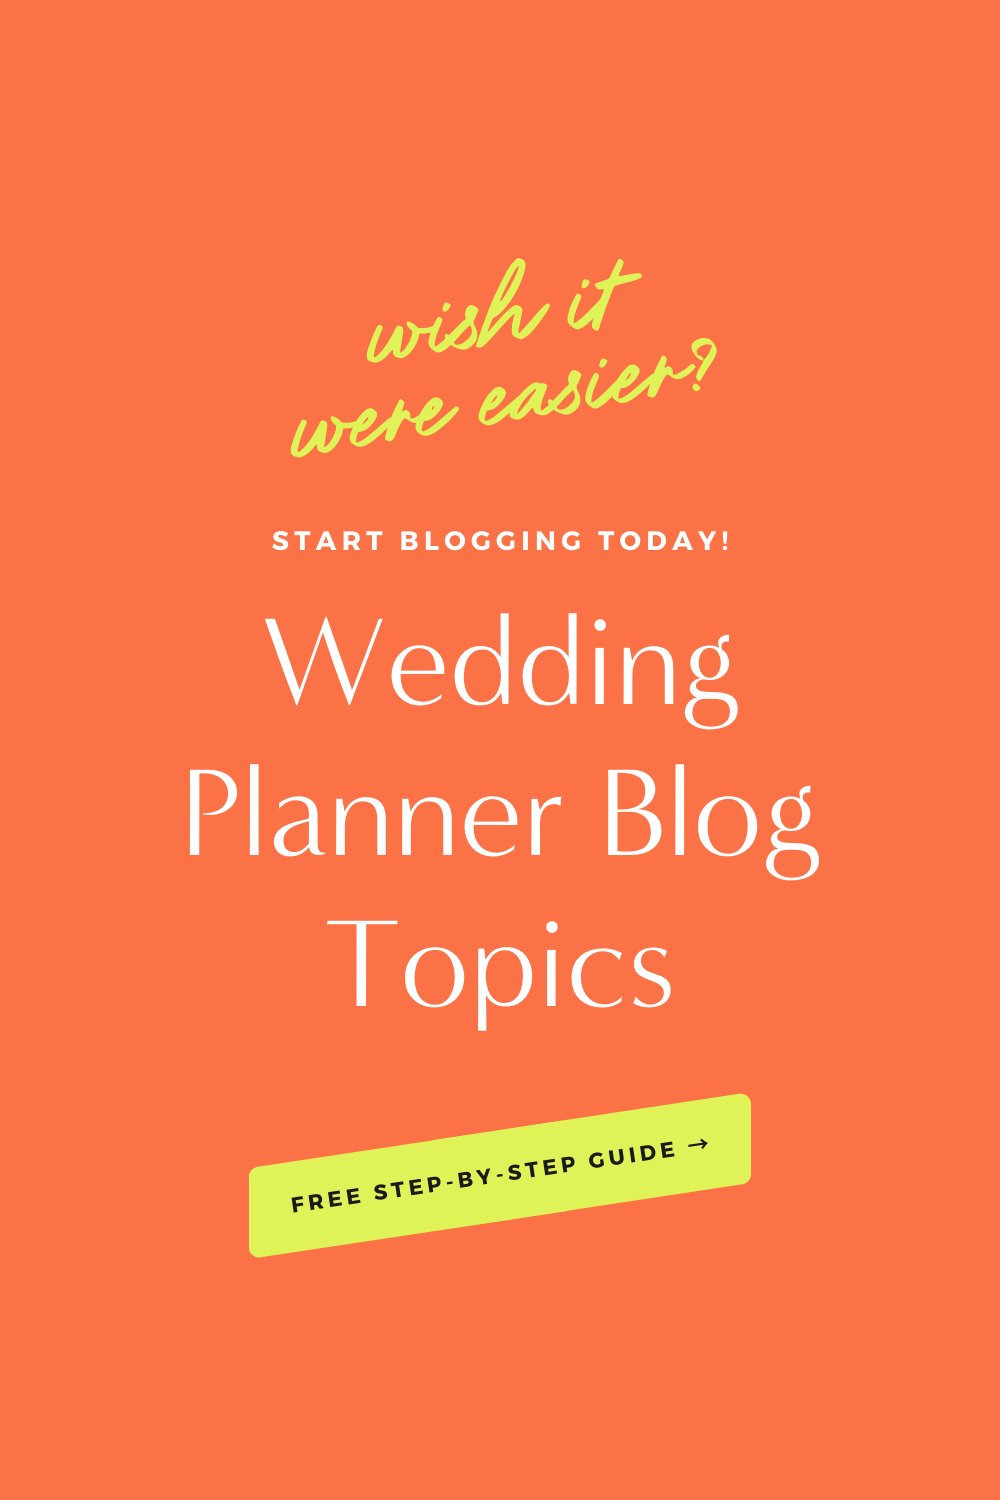 Free download alert for wedding planners! Boost your blog's ranking on Google and captivate your dream clients with our 10 tailored wedding planner blog ideas. Start writing impactful posts that not only provide value but also increase your visibility in search engines. Get your copy now and let your blogging journey begin!